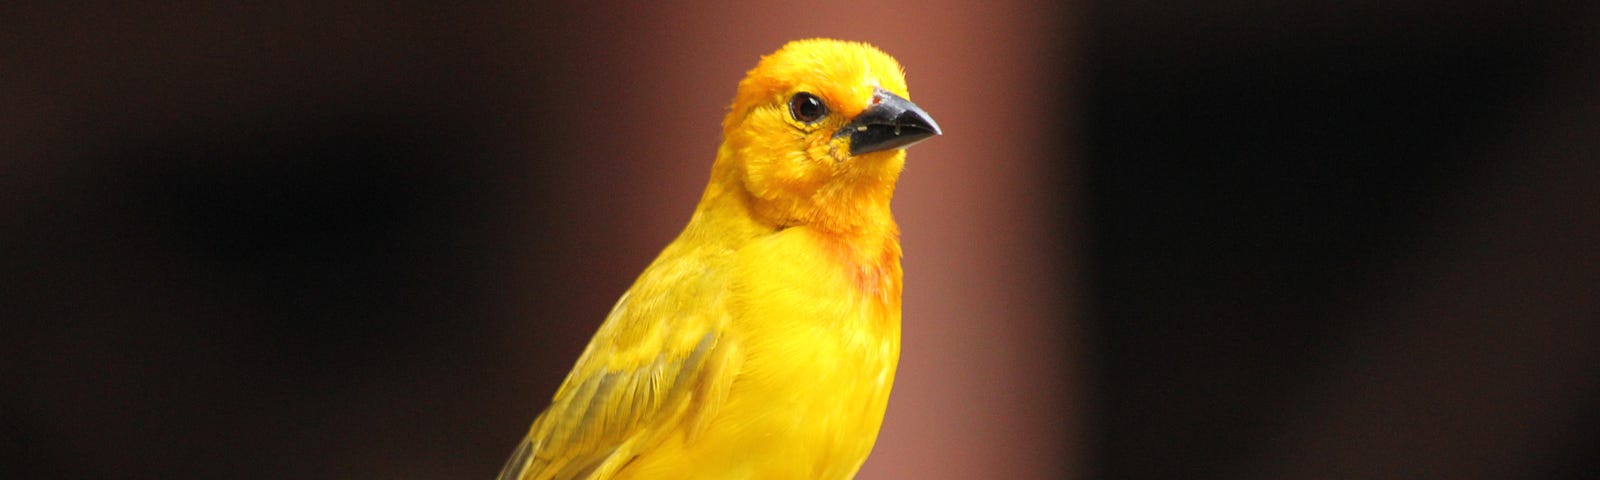 A bright yellow bird standing over a tree trunk